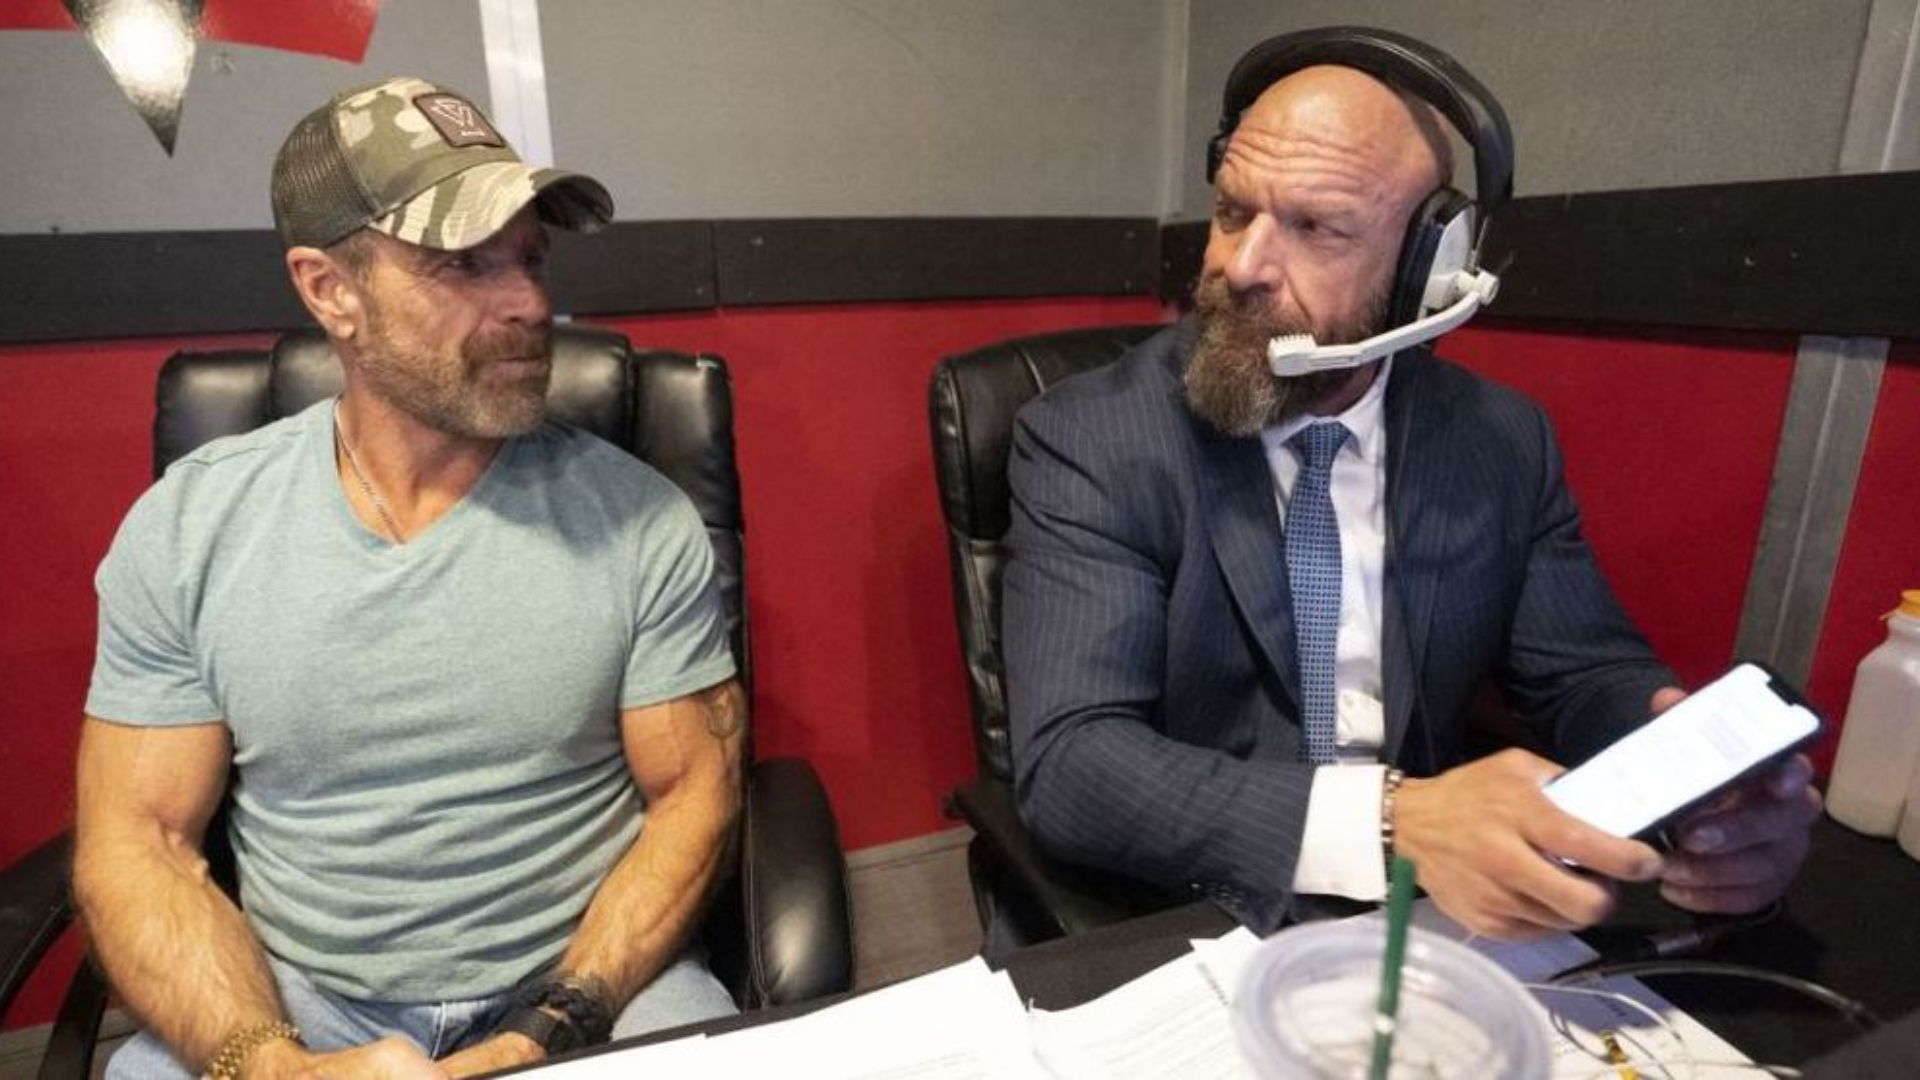 Shawn Michaels is the boss of NXT.